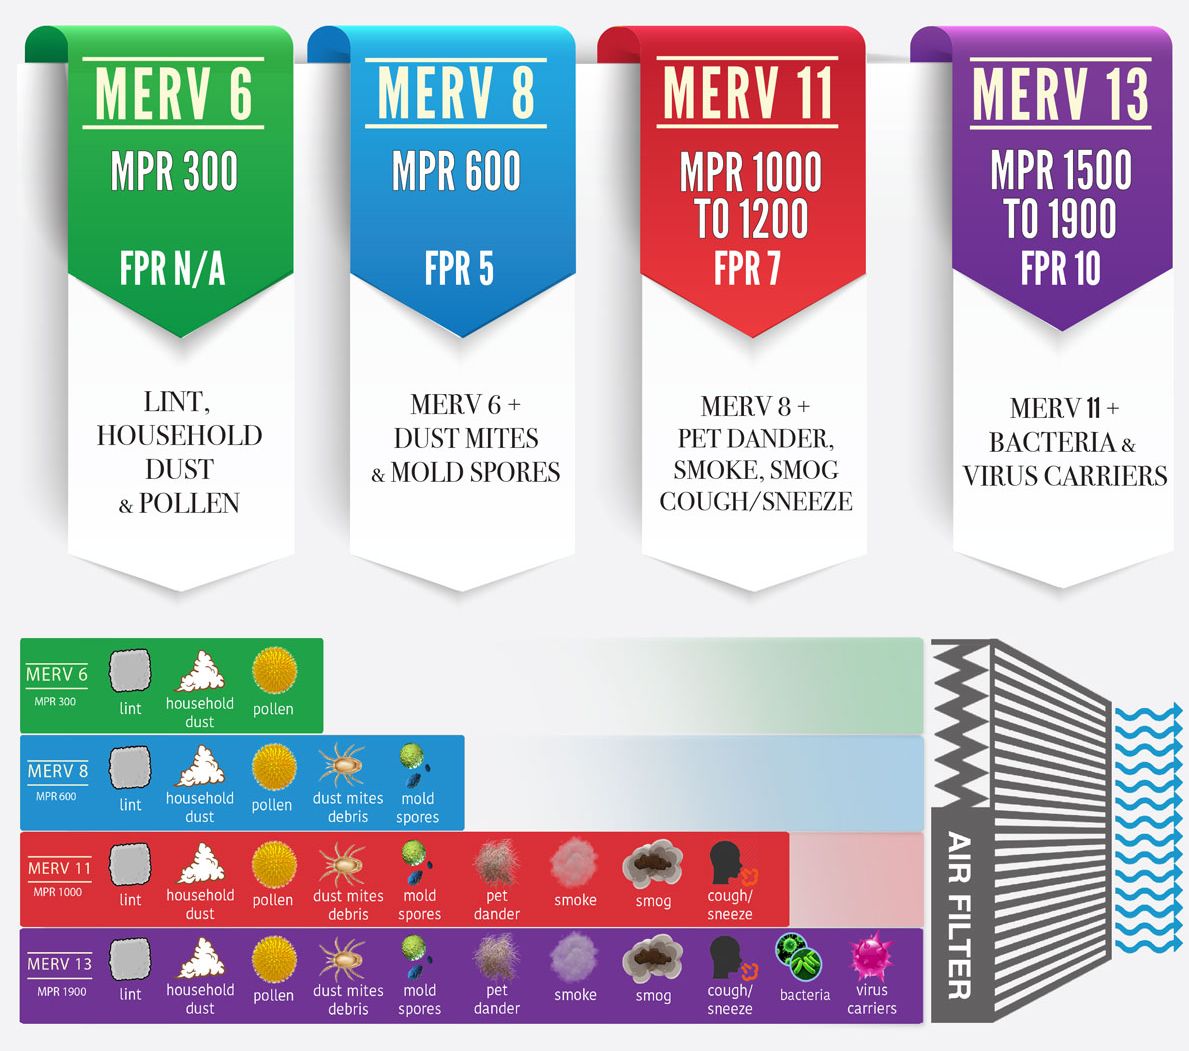 MERV MPR FPR Air Filter Ratings Compared